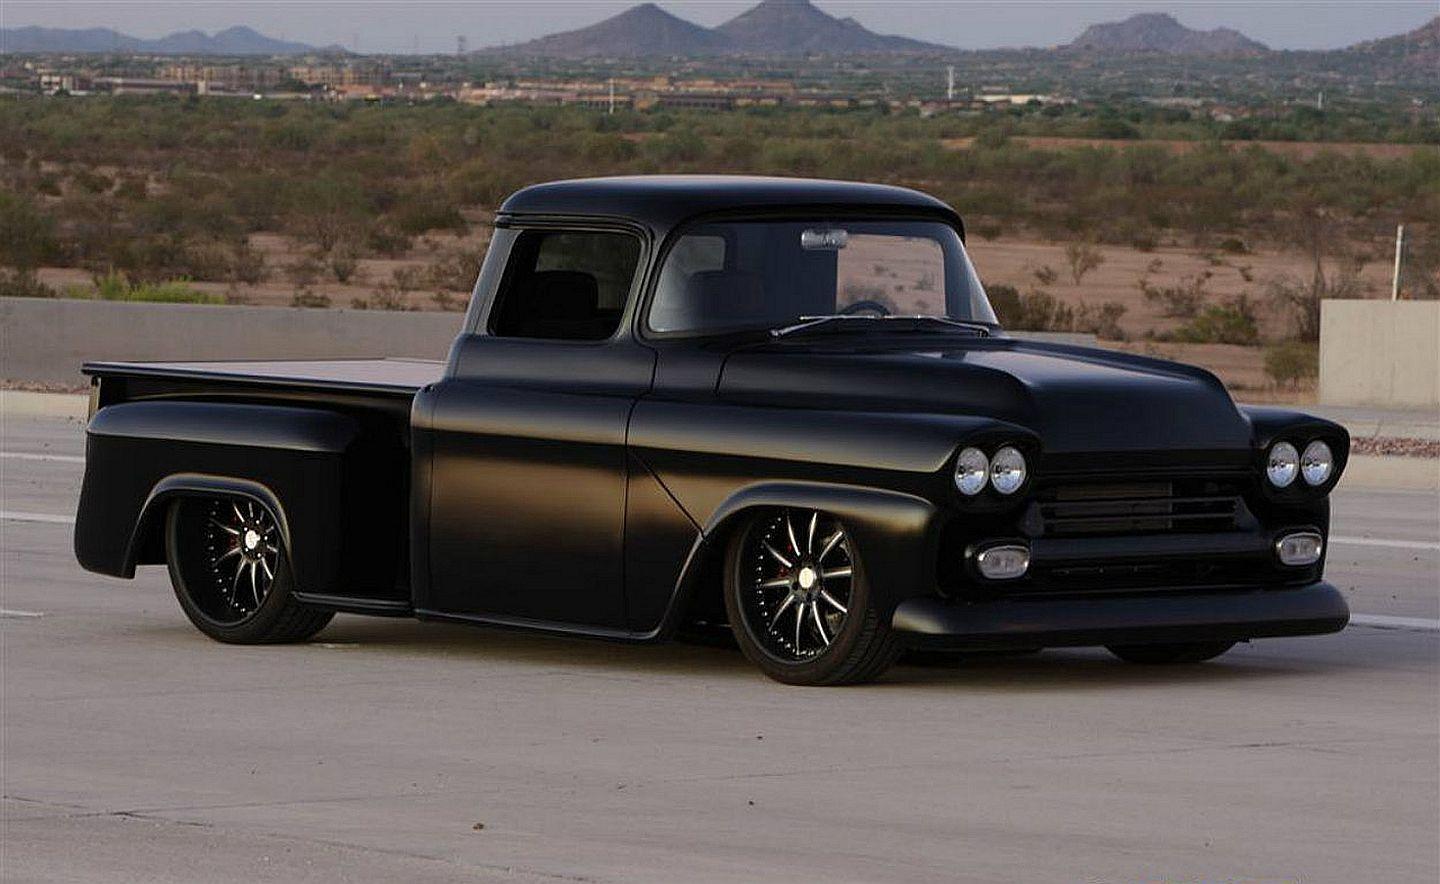 Classic Chevy Truck Wallpapers - Top Free Classic Chevy Truck